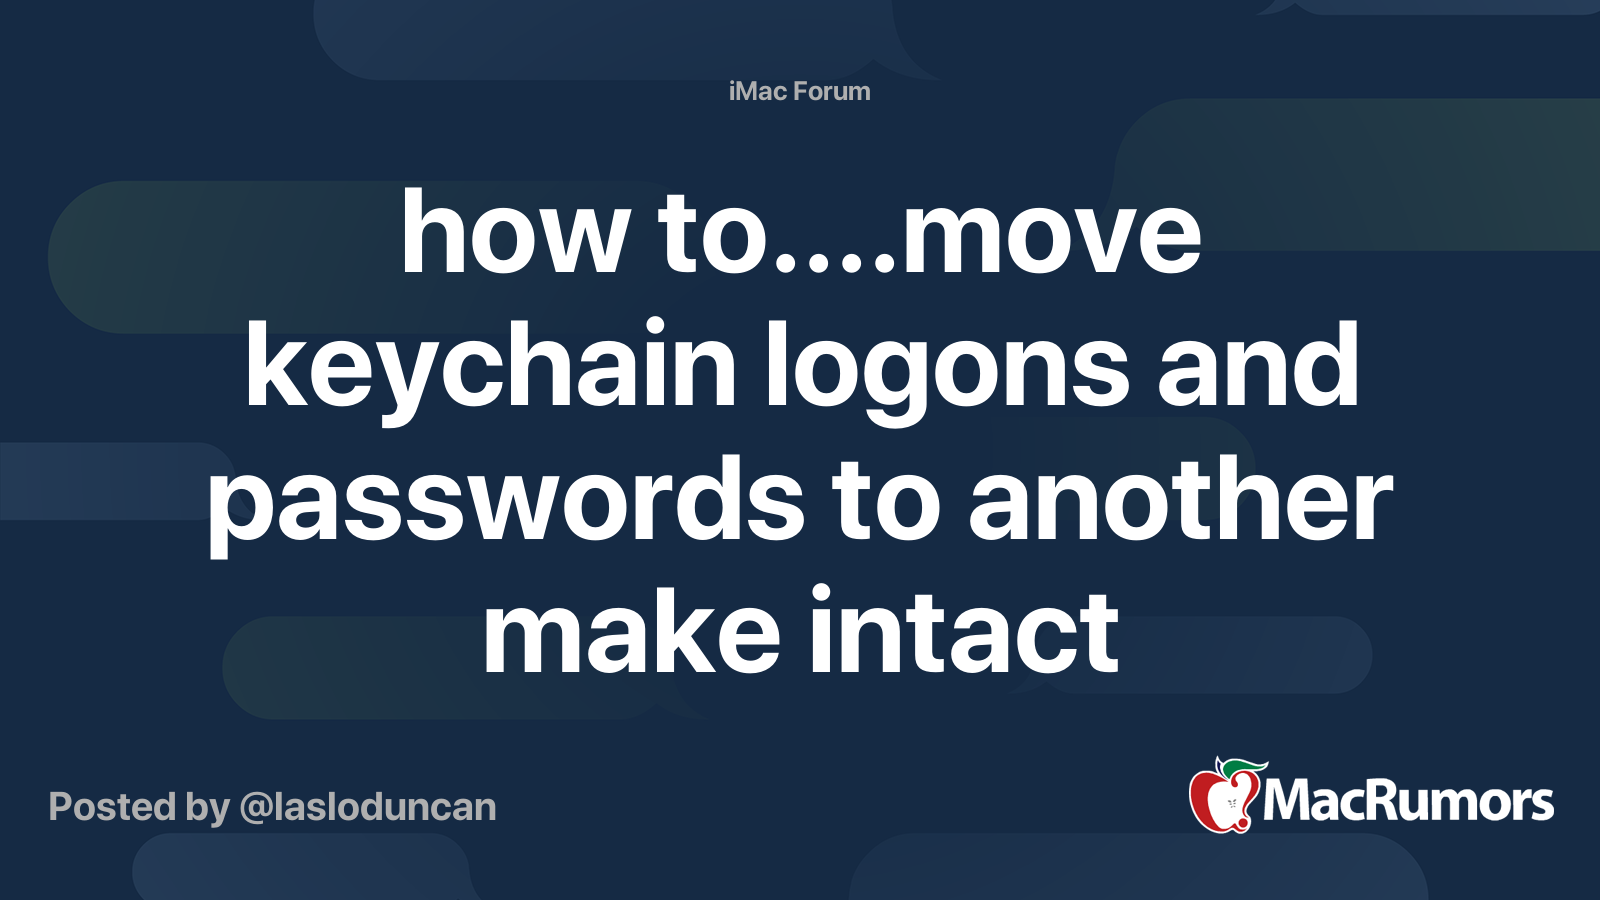 how to....move keychain logons and passwords to another make intact